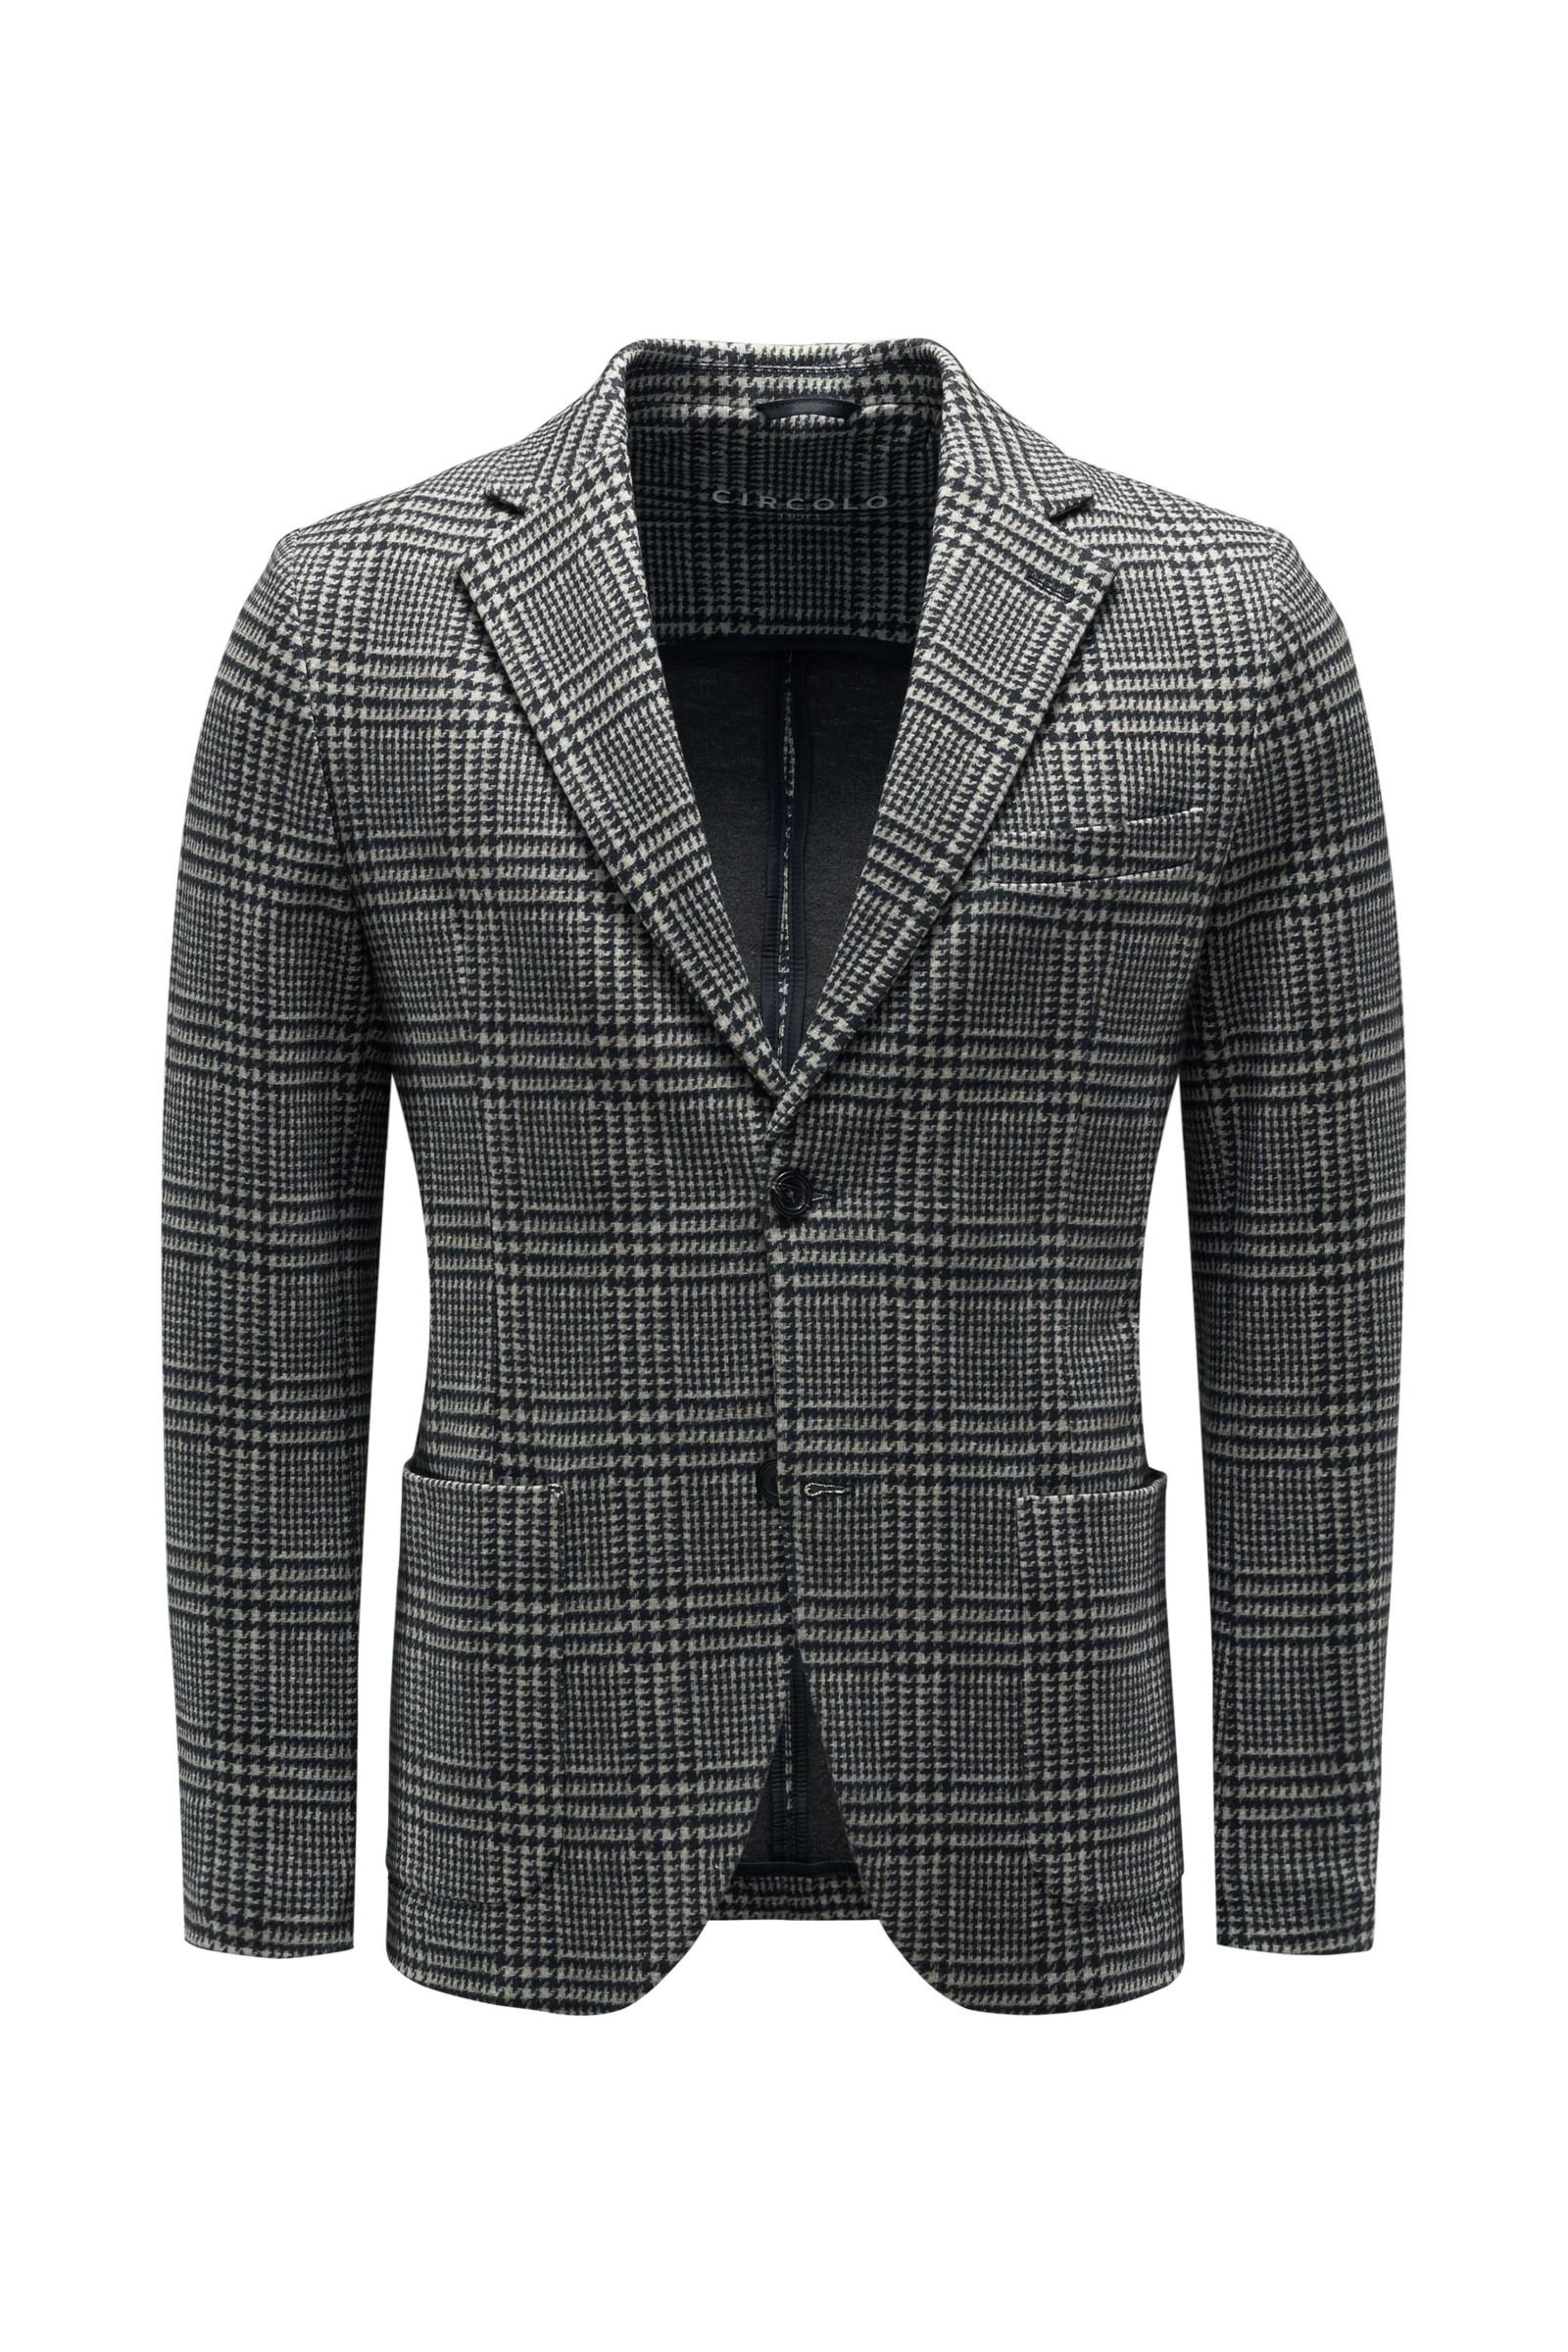 Jersey smart-casual jacket 'Giacca' black/off-white checked